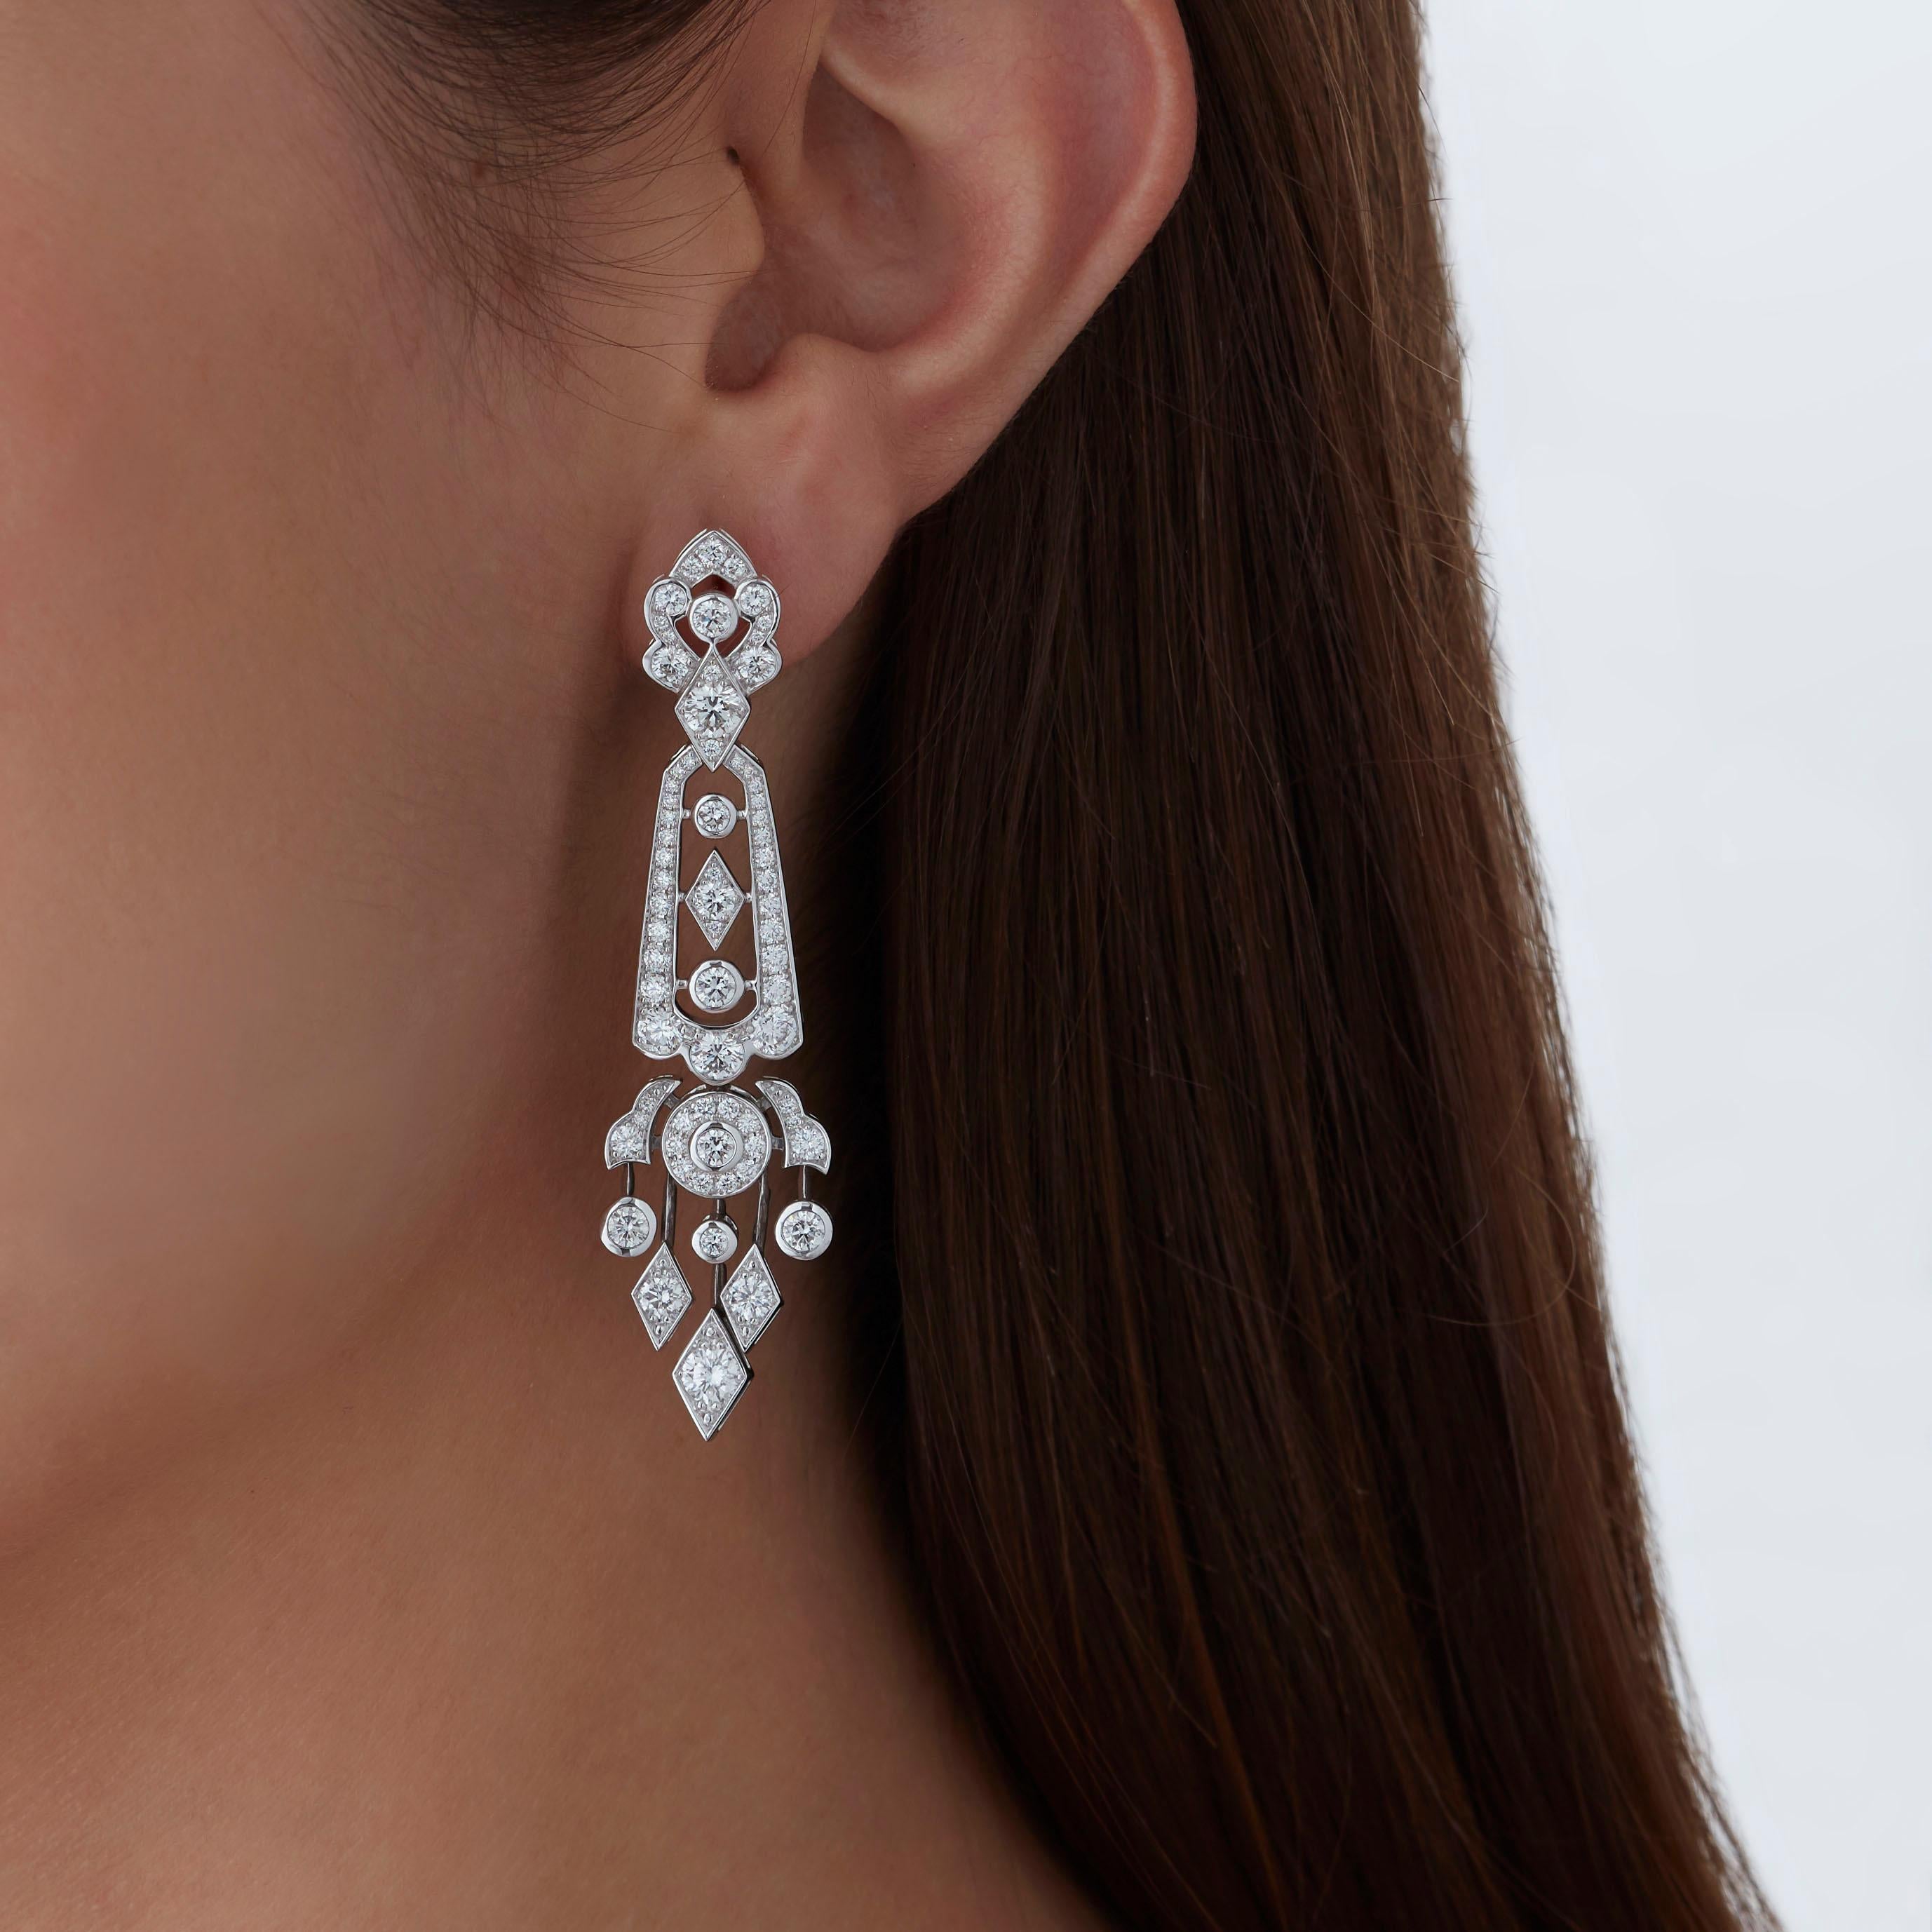 A House of Garrard pair of 18 karat white gold drop earrings from the 'Albemarle' collection, set with round white diamonds.

140 round white diamonds weighing: 4.43cts

The House of Garrard is the longest serving jeweller in the world. The creative